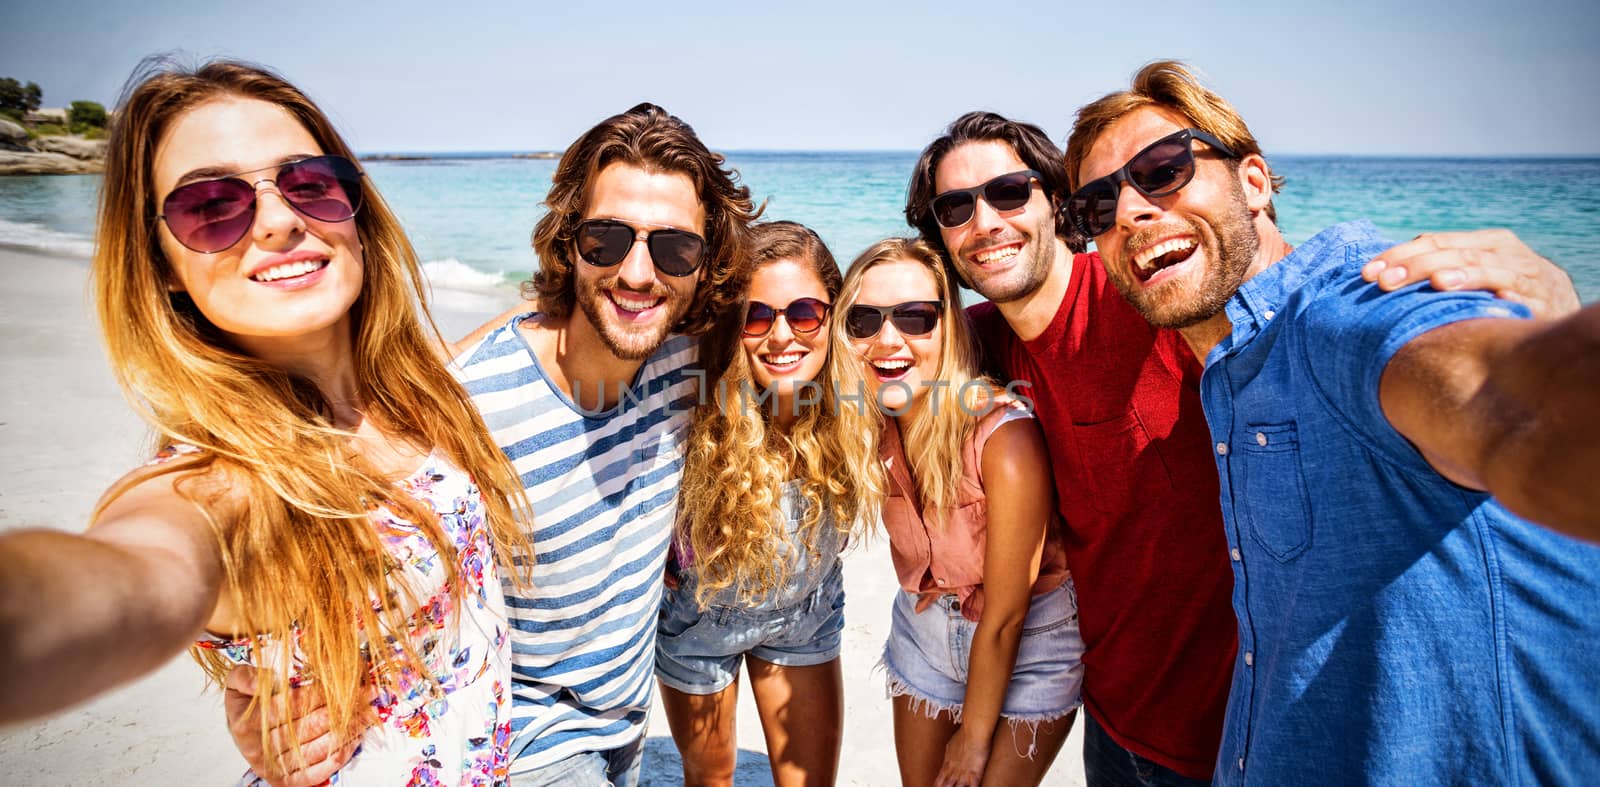 Cheerful friends standing on shore at beach during sunny day